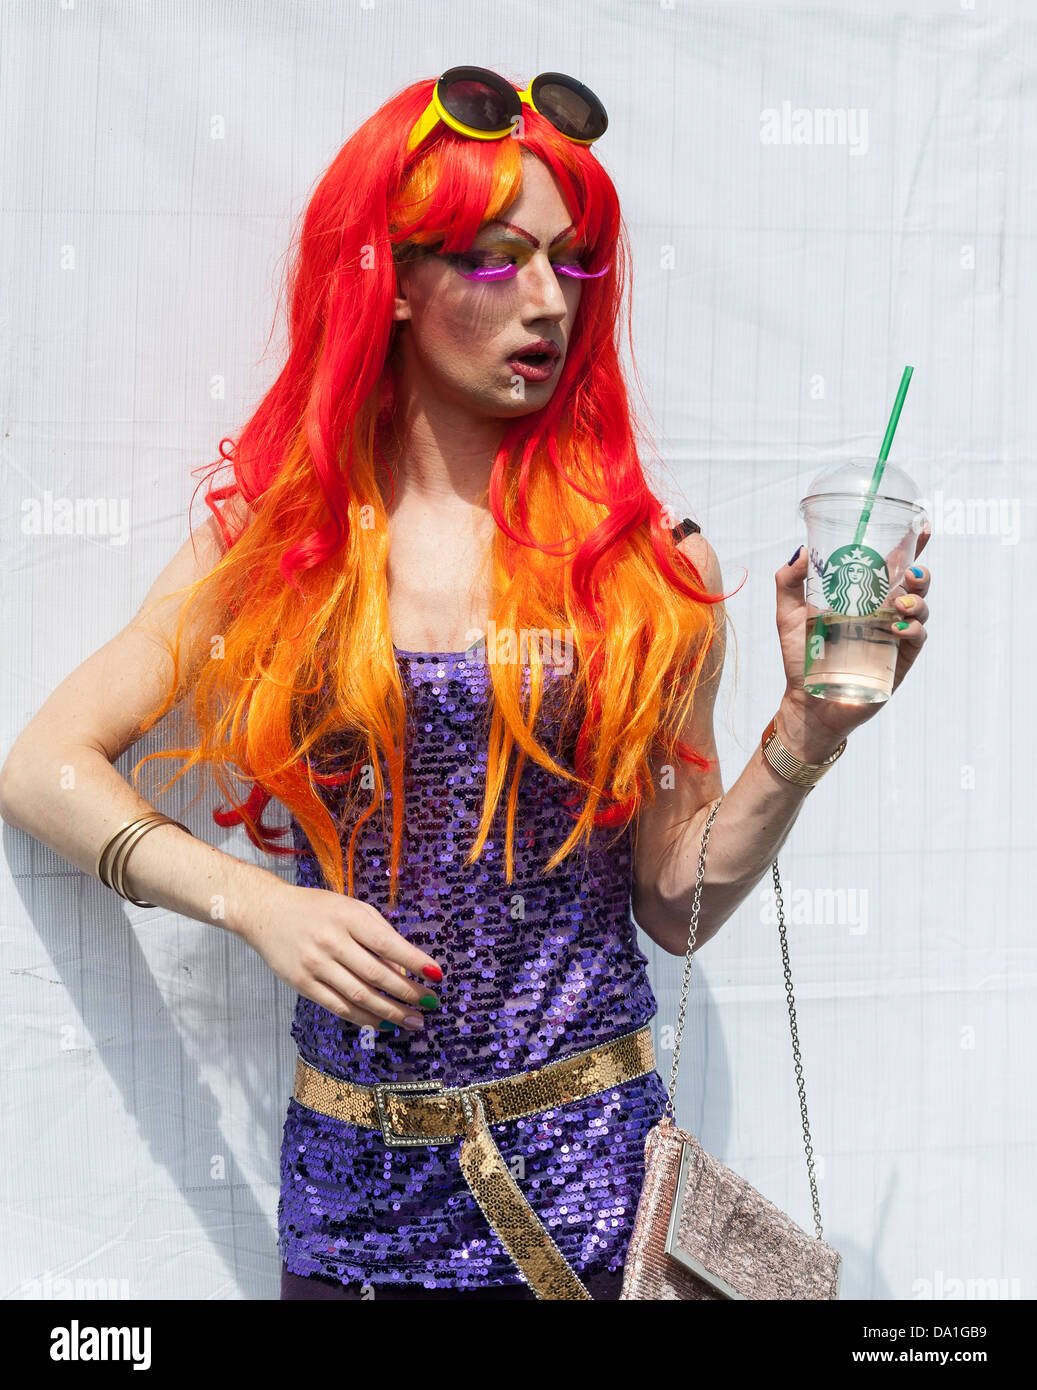 A transvestite posing in a vibrantly colourful wig. Stock Photo